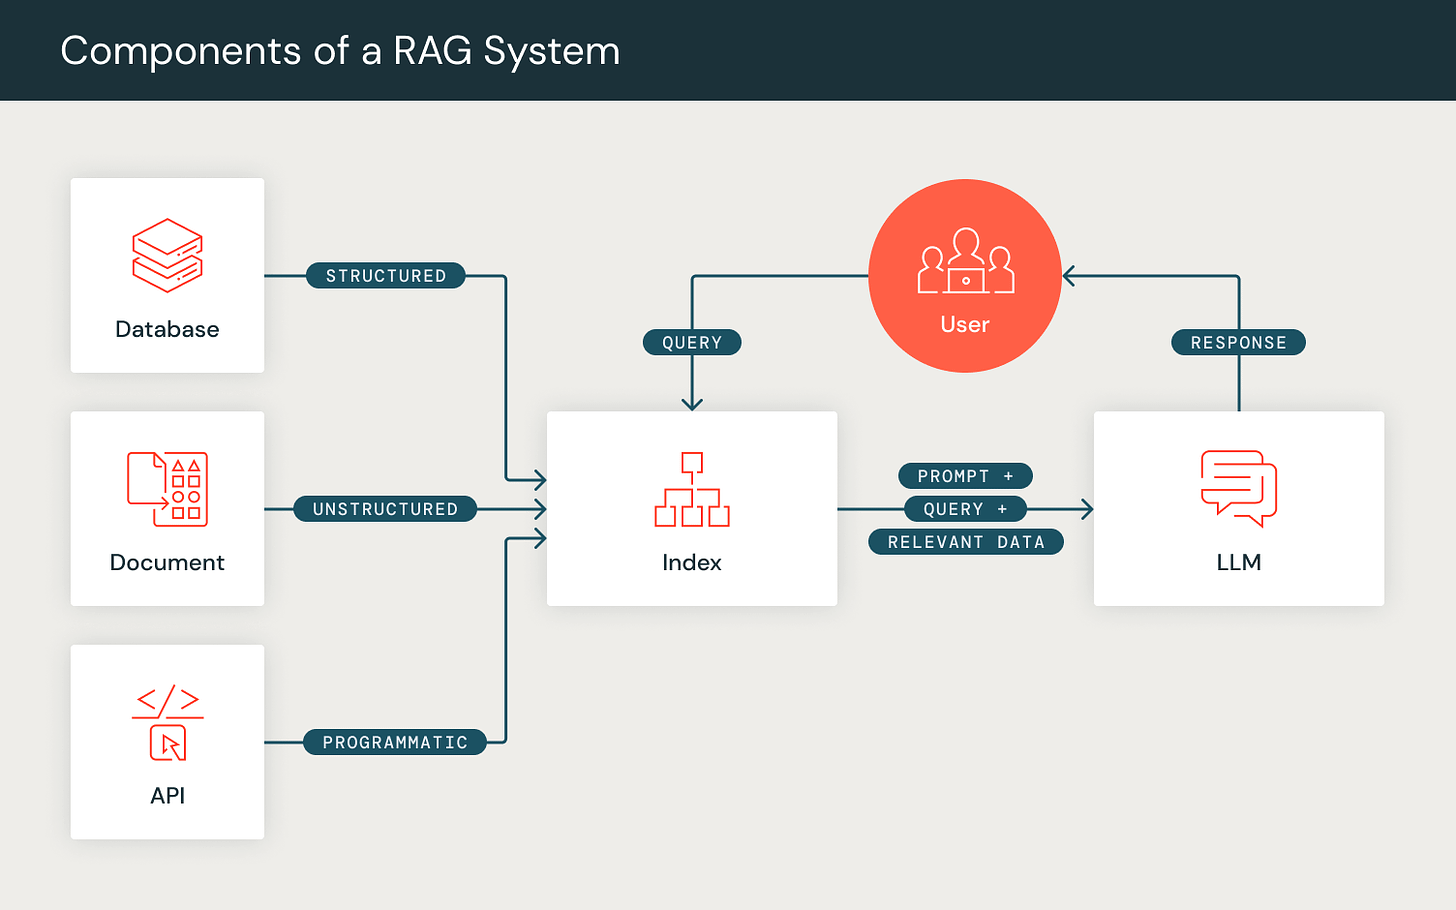 Diagram depicting the components of a RAG system